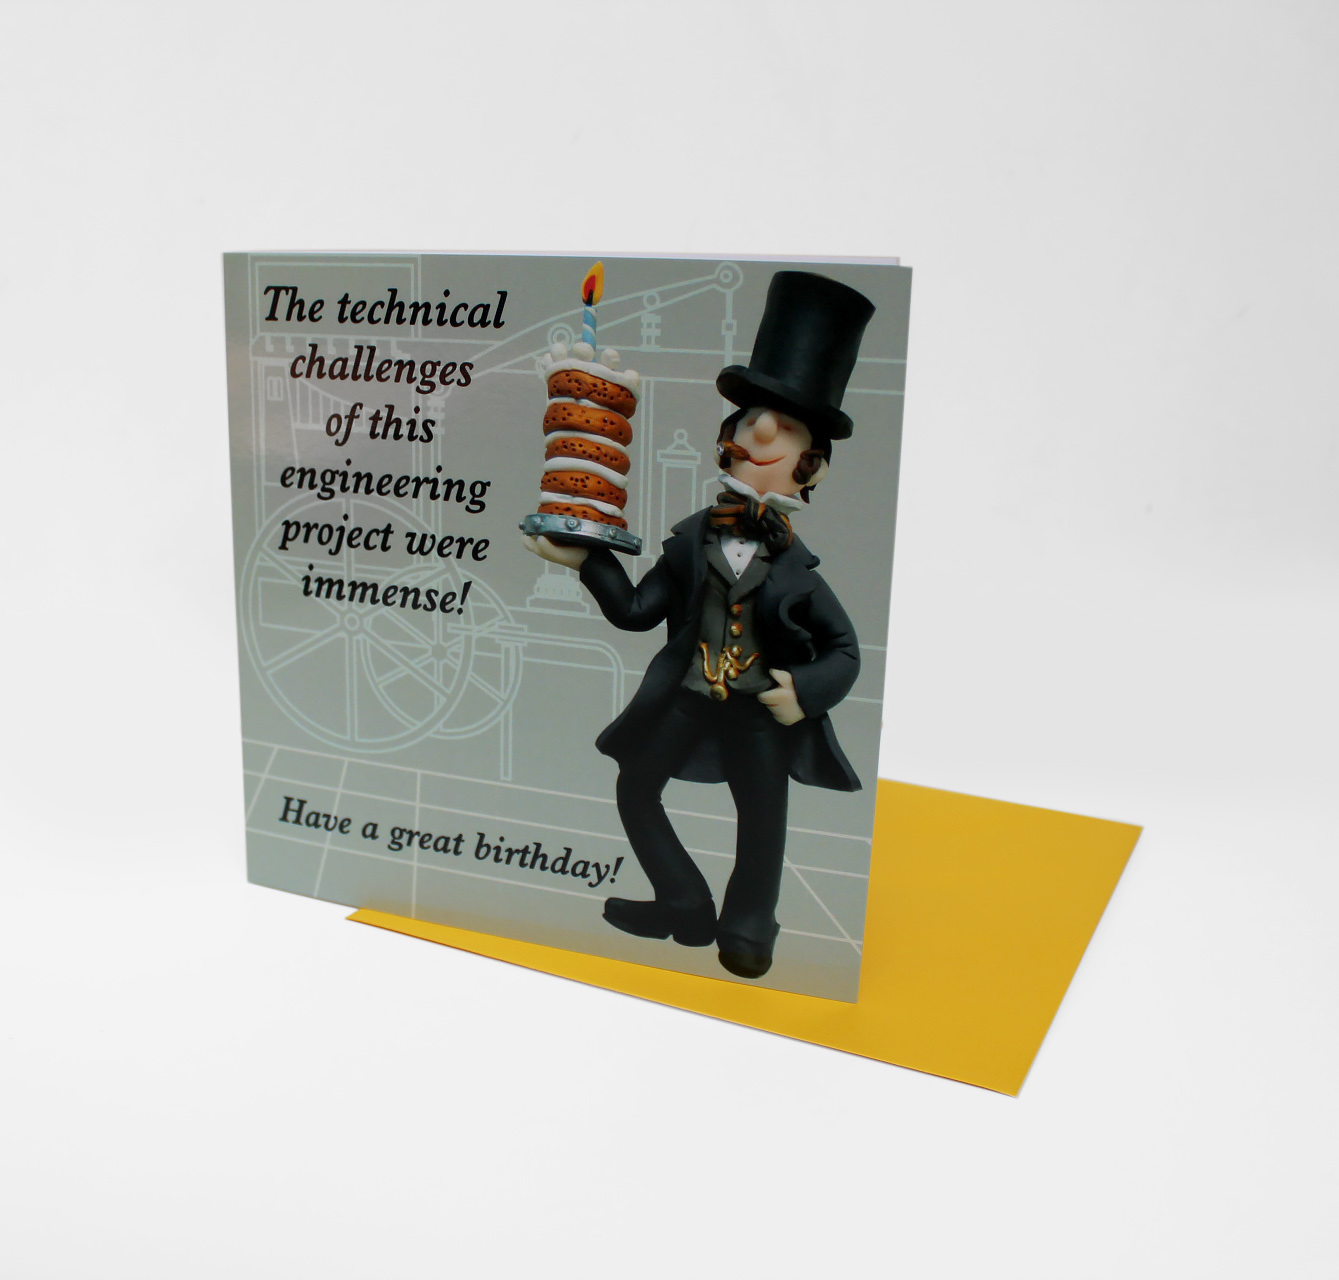 Birthday card featuring fun version of IKB holding a very tall cake. The text reads "The technical challenges of this engineering project were immense! Have a great birthday!"